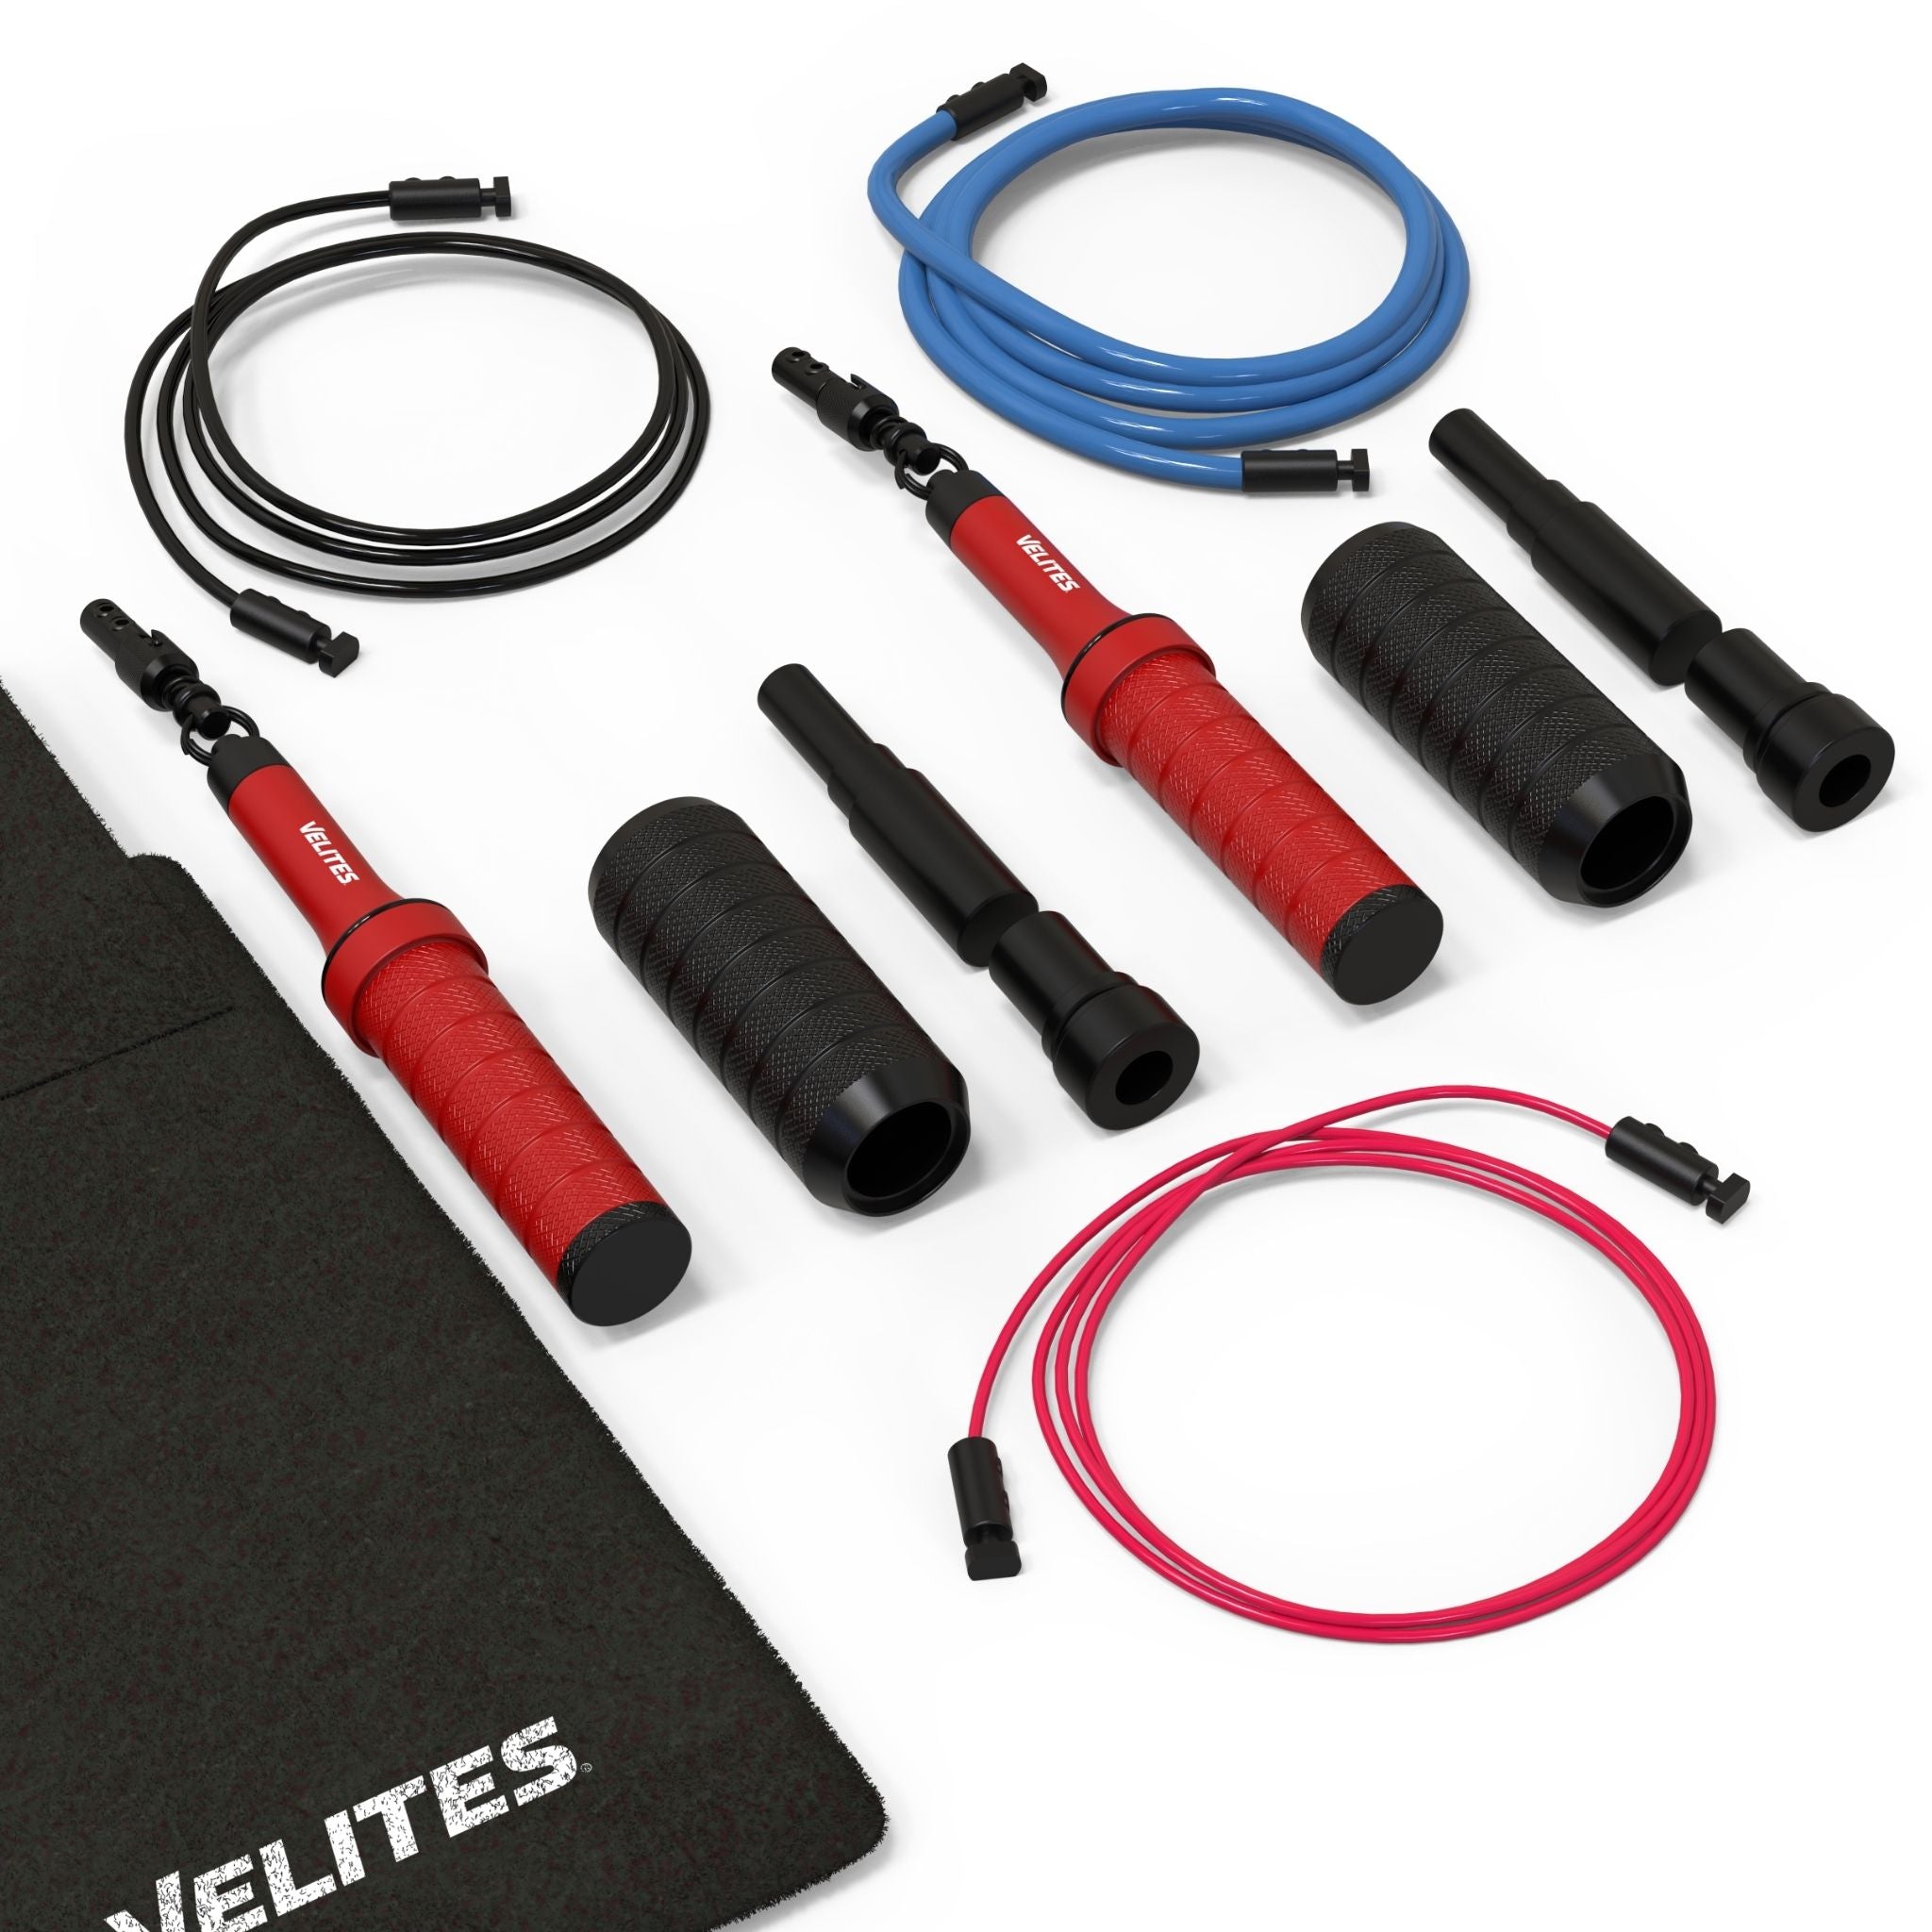 Pack Comba Earth 2.0 Velites + Lastres + Cables  MKP